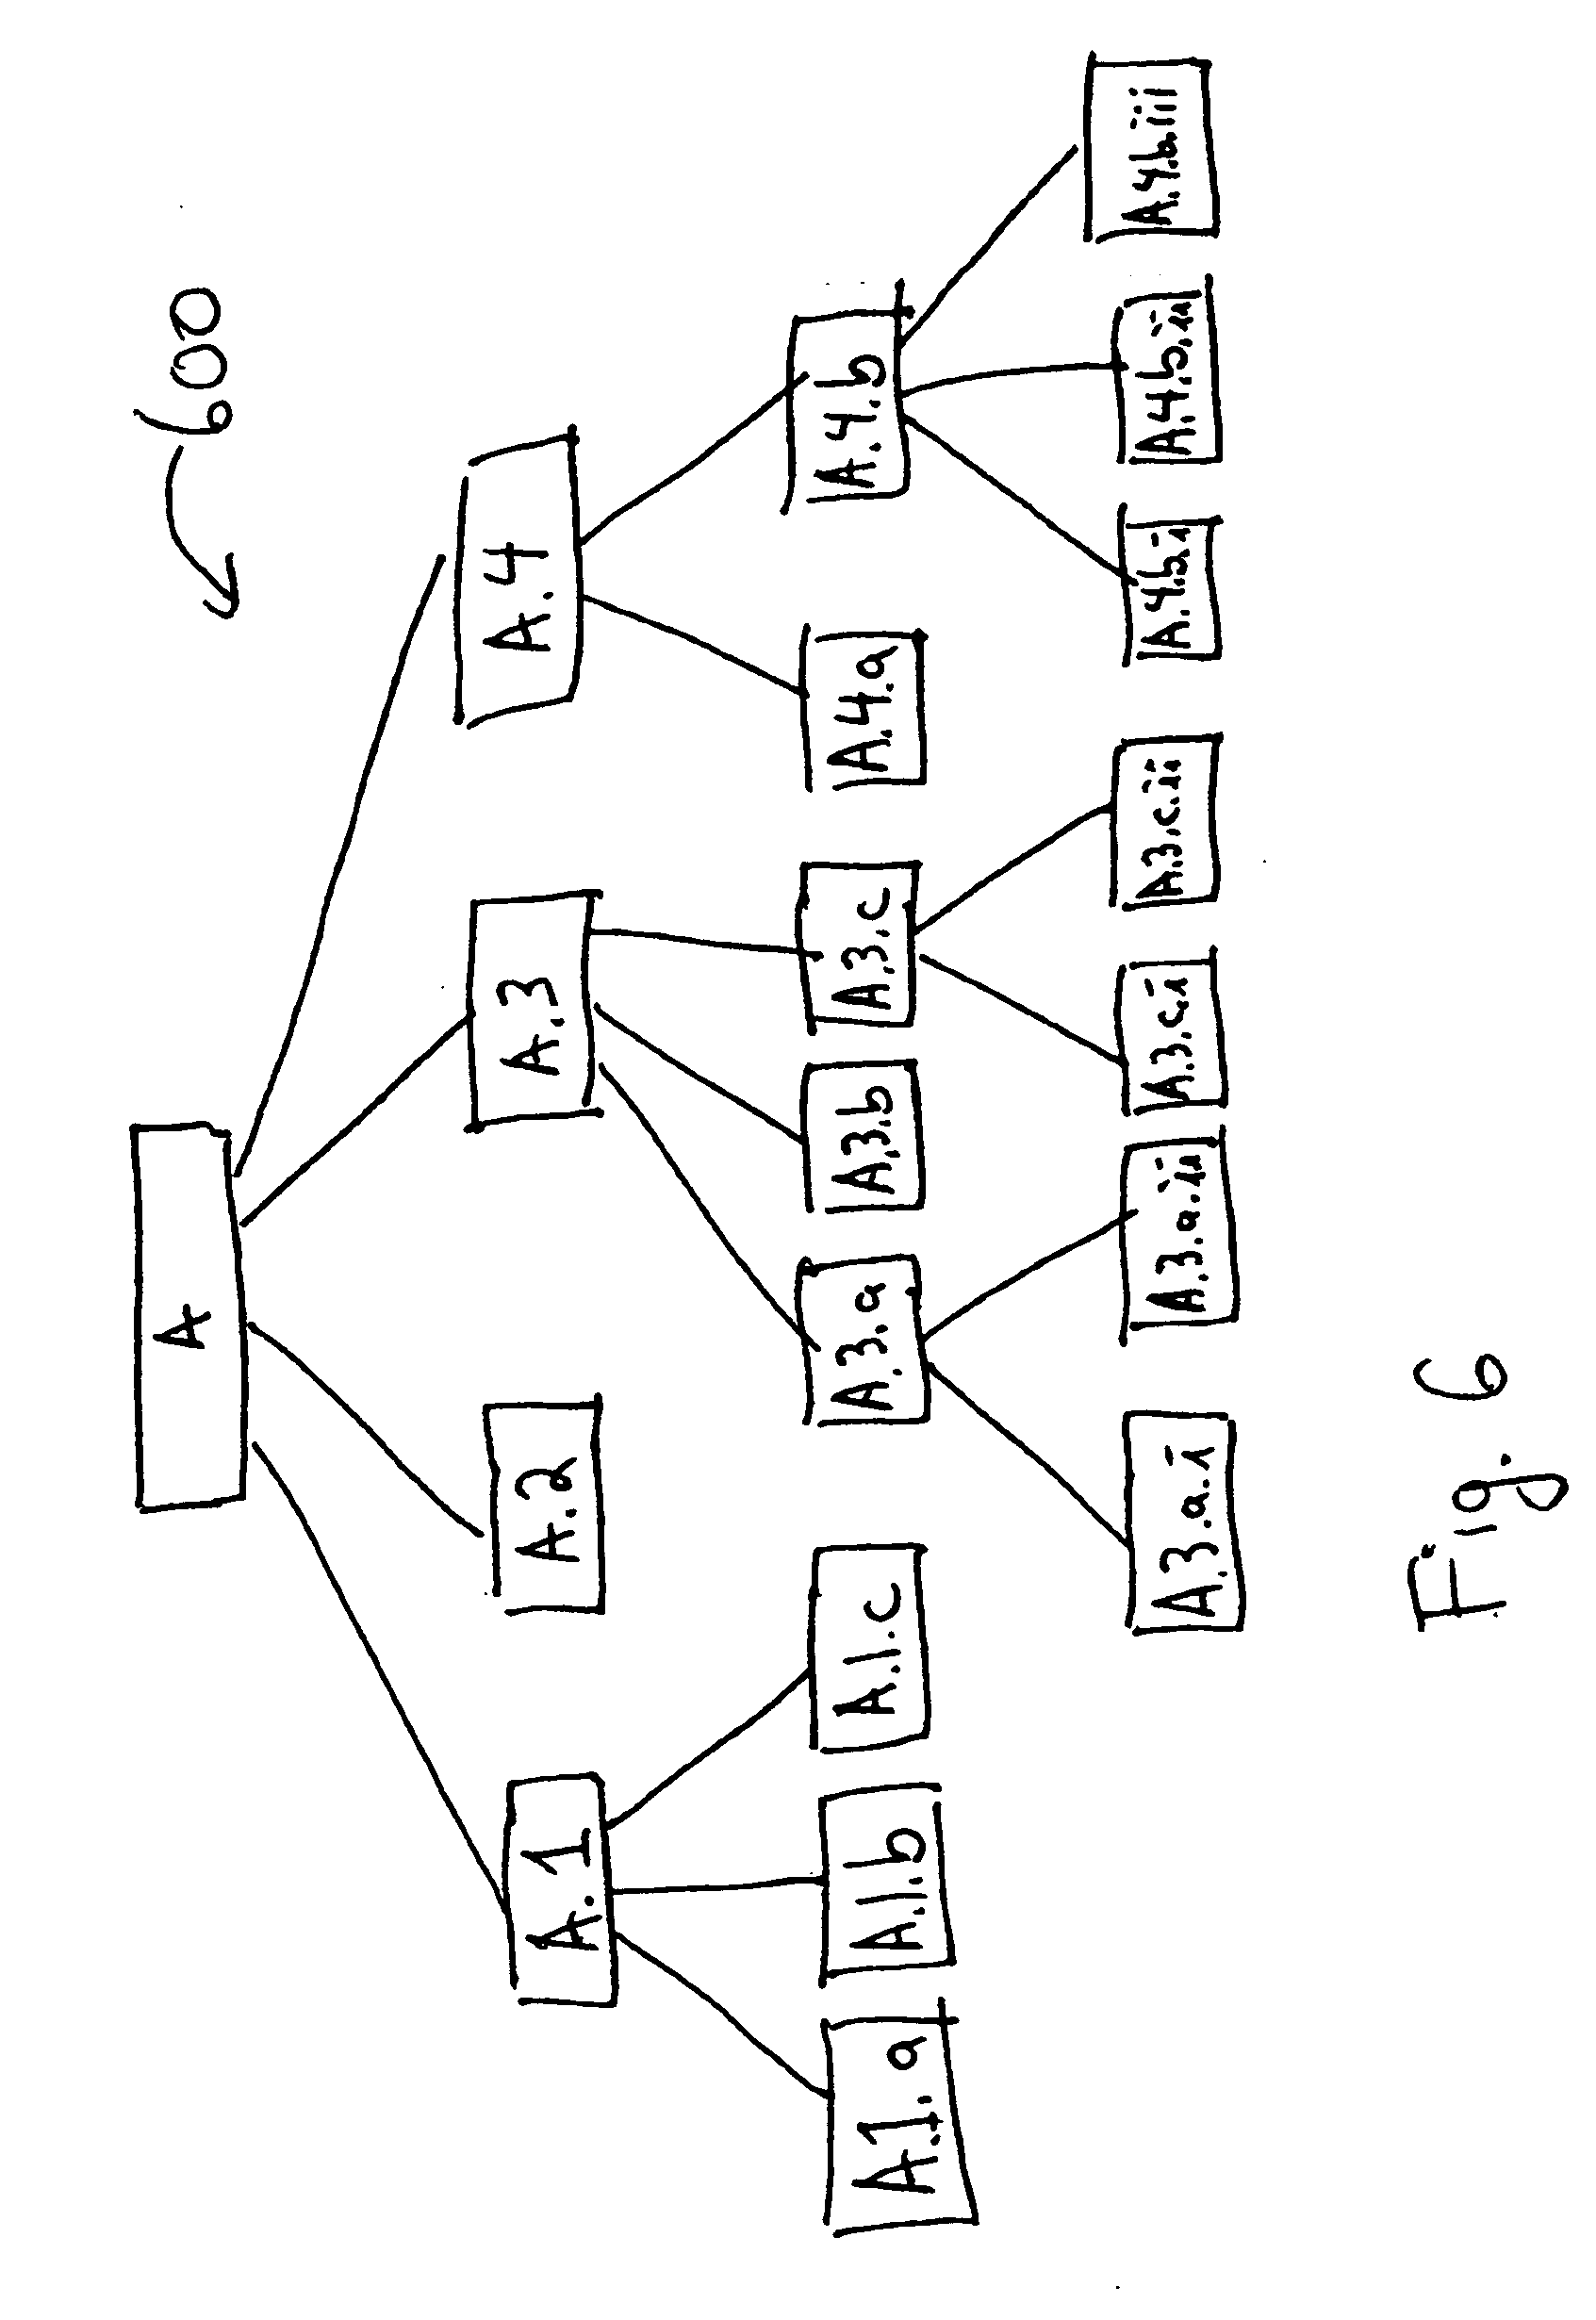 Competitive product intelligence system and method, including patent analysis and formulation using one or more ontologies